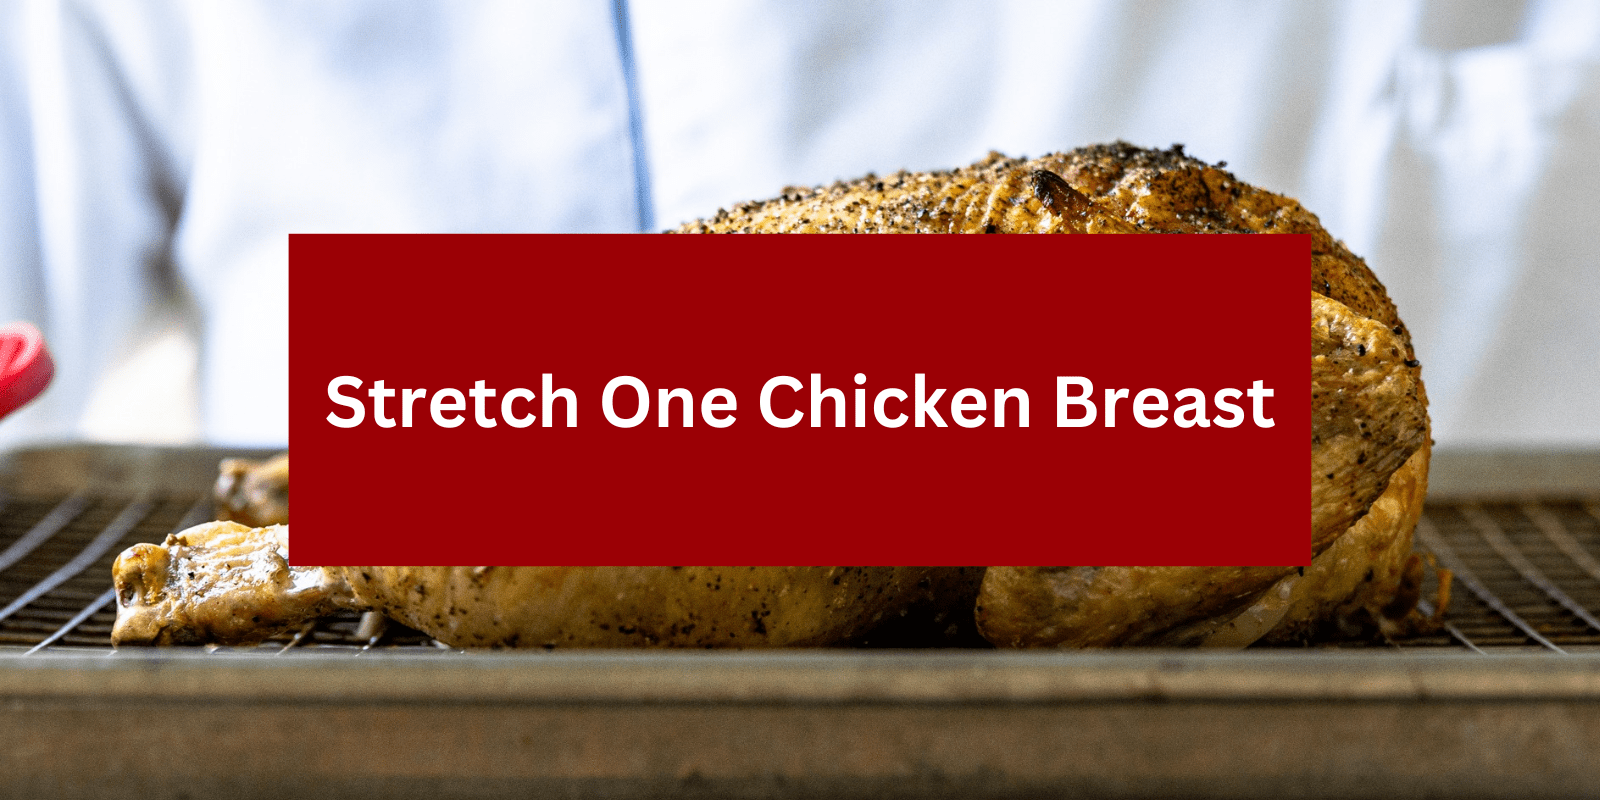 How to Stretch One Chicken Breast